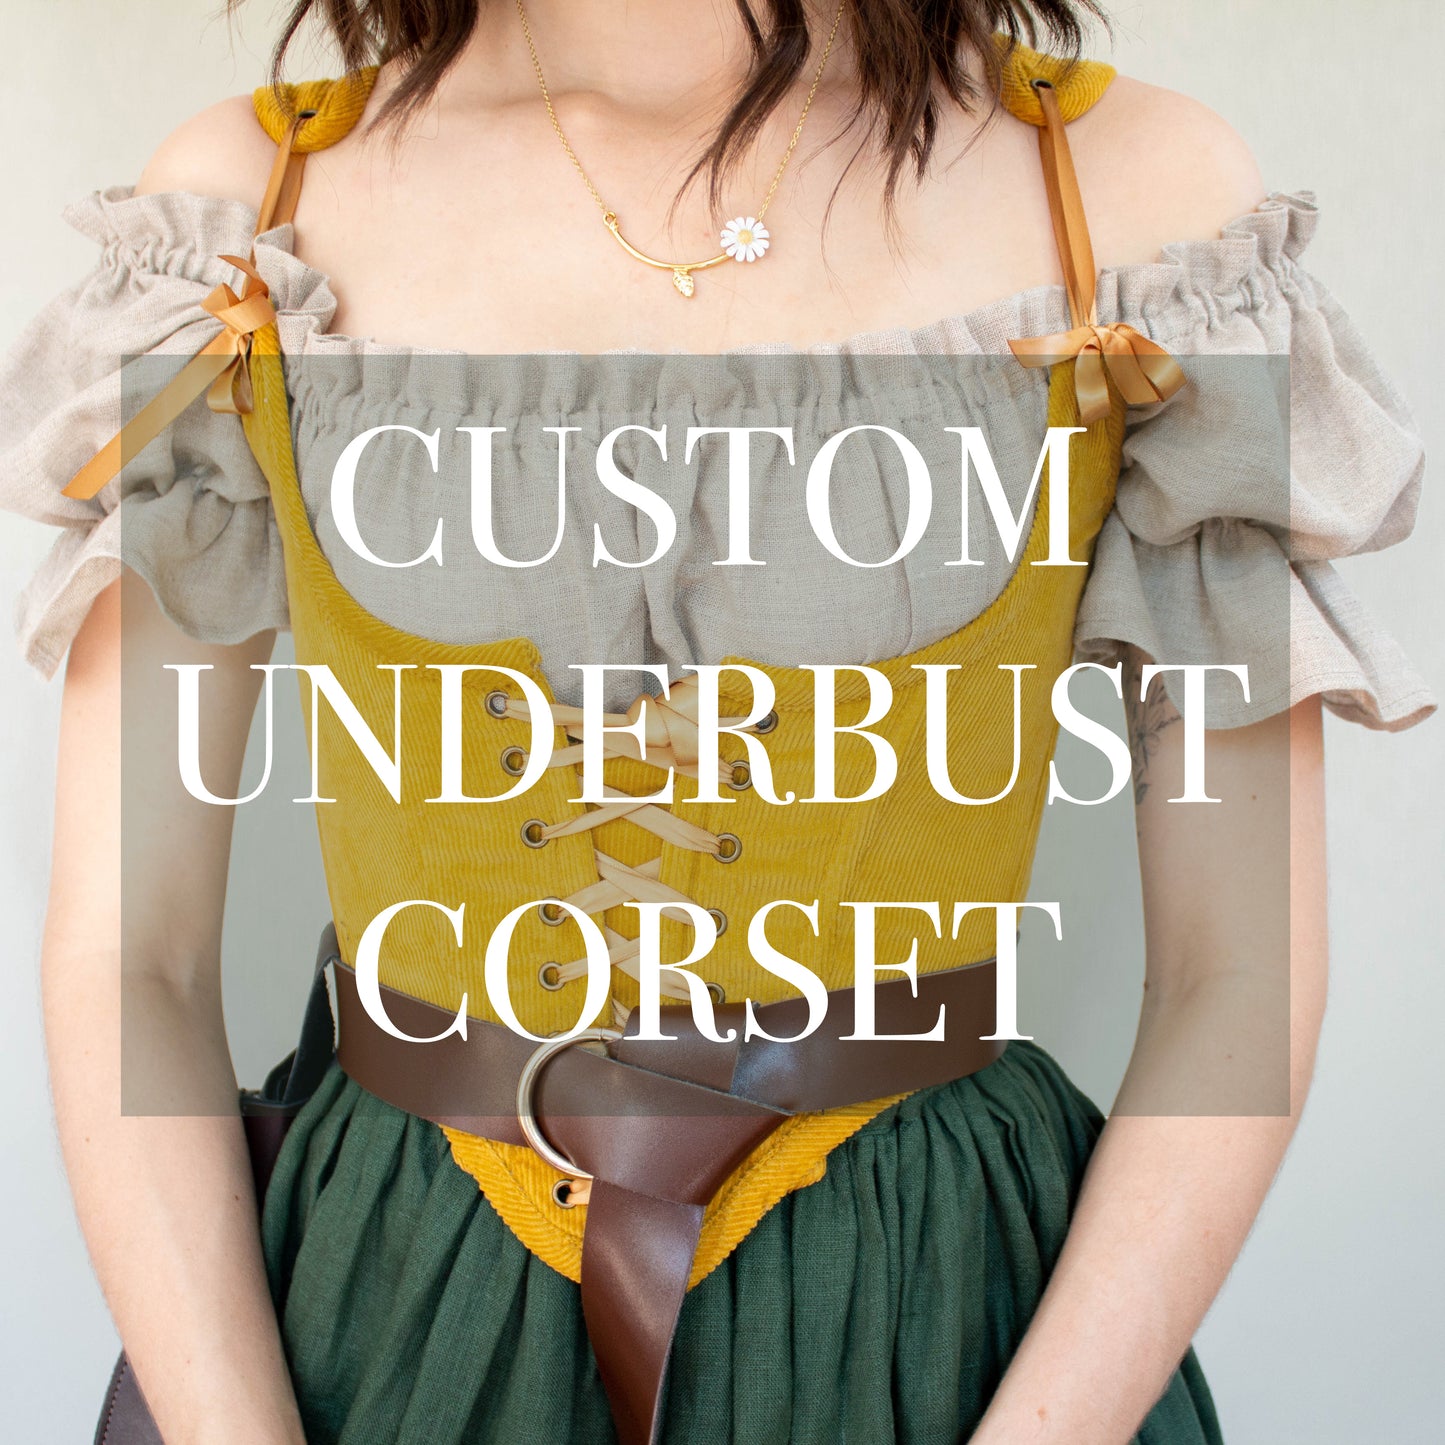 woman wearing a yellow underbust corset with straps with text saying "custom underbust corset" over the image